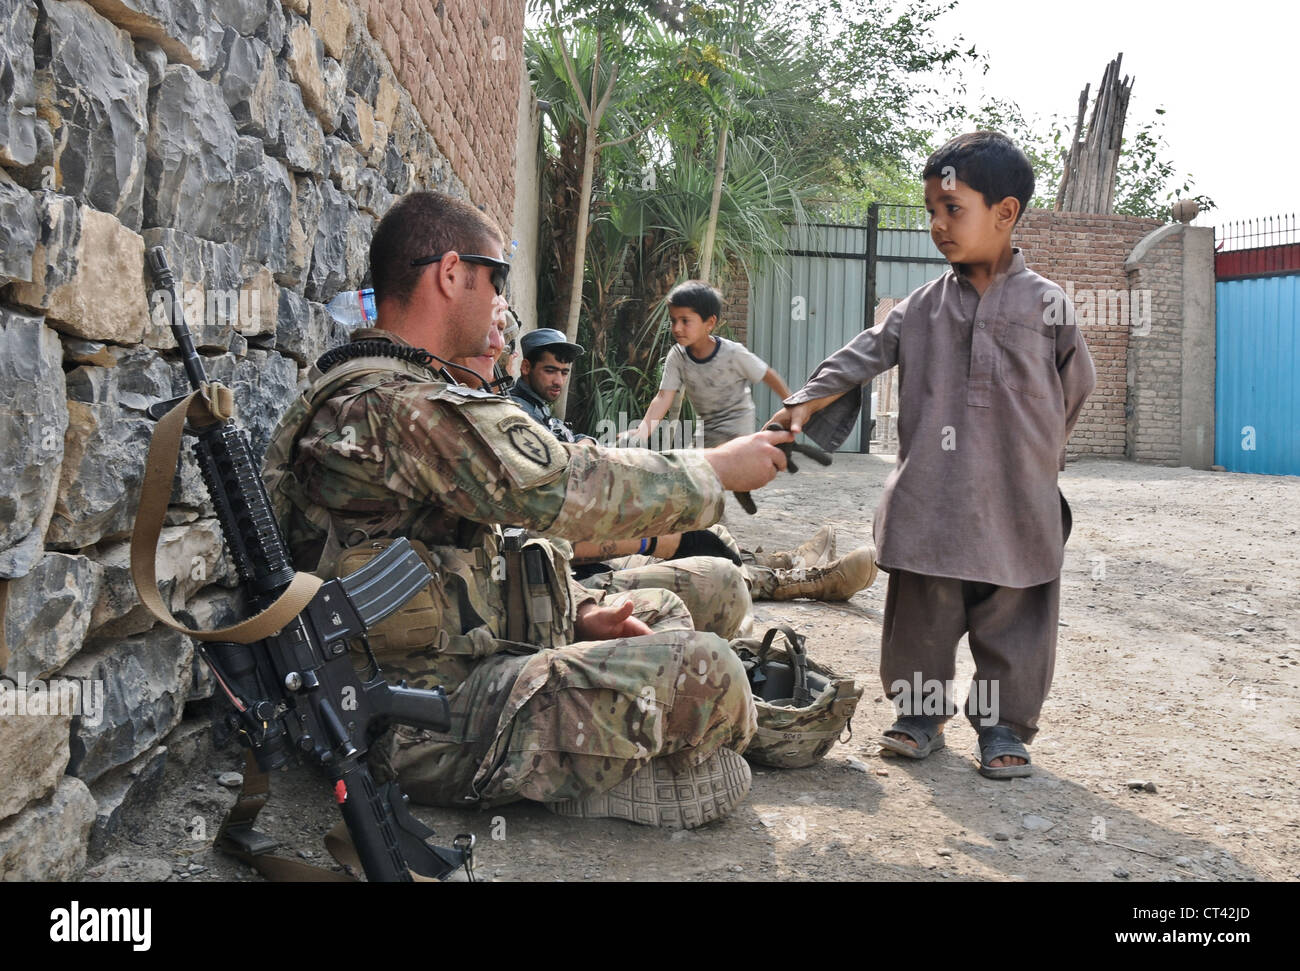 A US Airborne paratroopers greet children during a security patrol outside of Forward Operating Base Salerno July 7, 2012 in Kunday, Afghanistan. Soldiers provided security for a midwife program held at a girls school in the village. Stock Photo